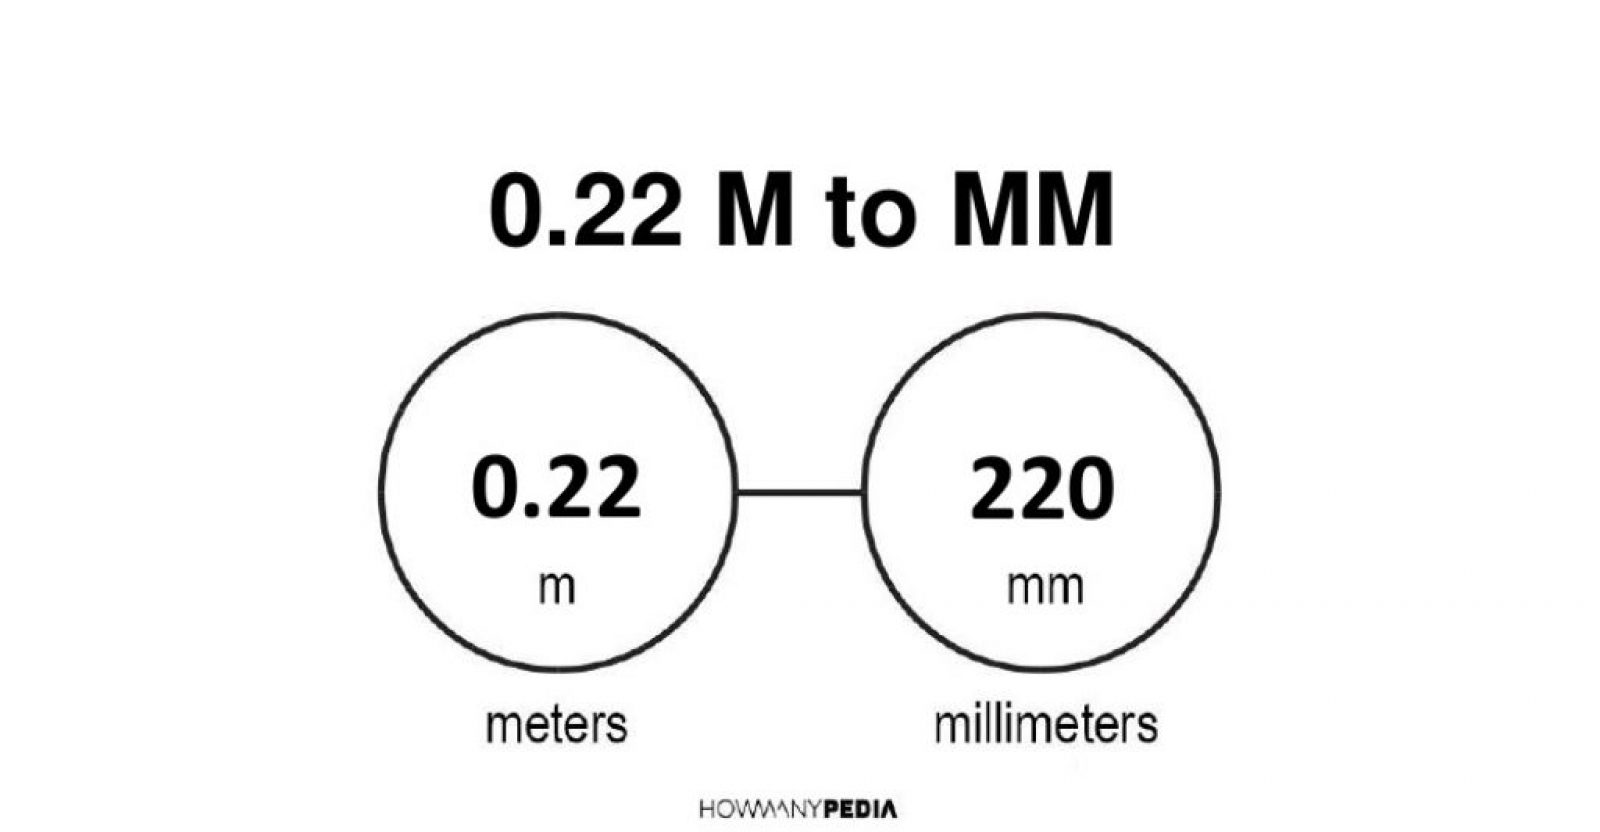 0.22 m to mm